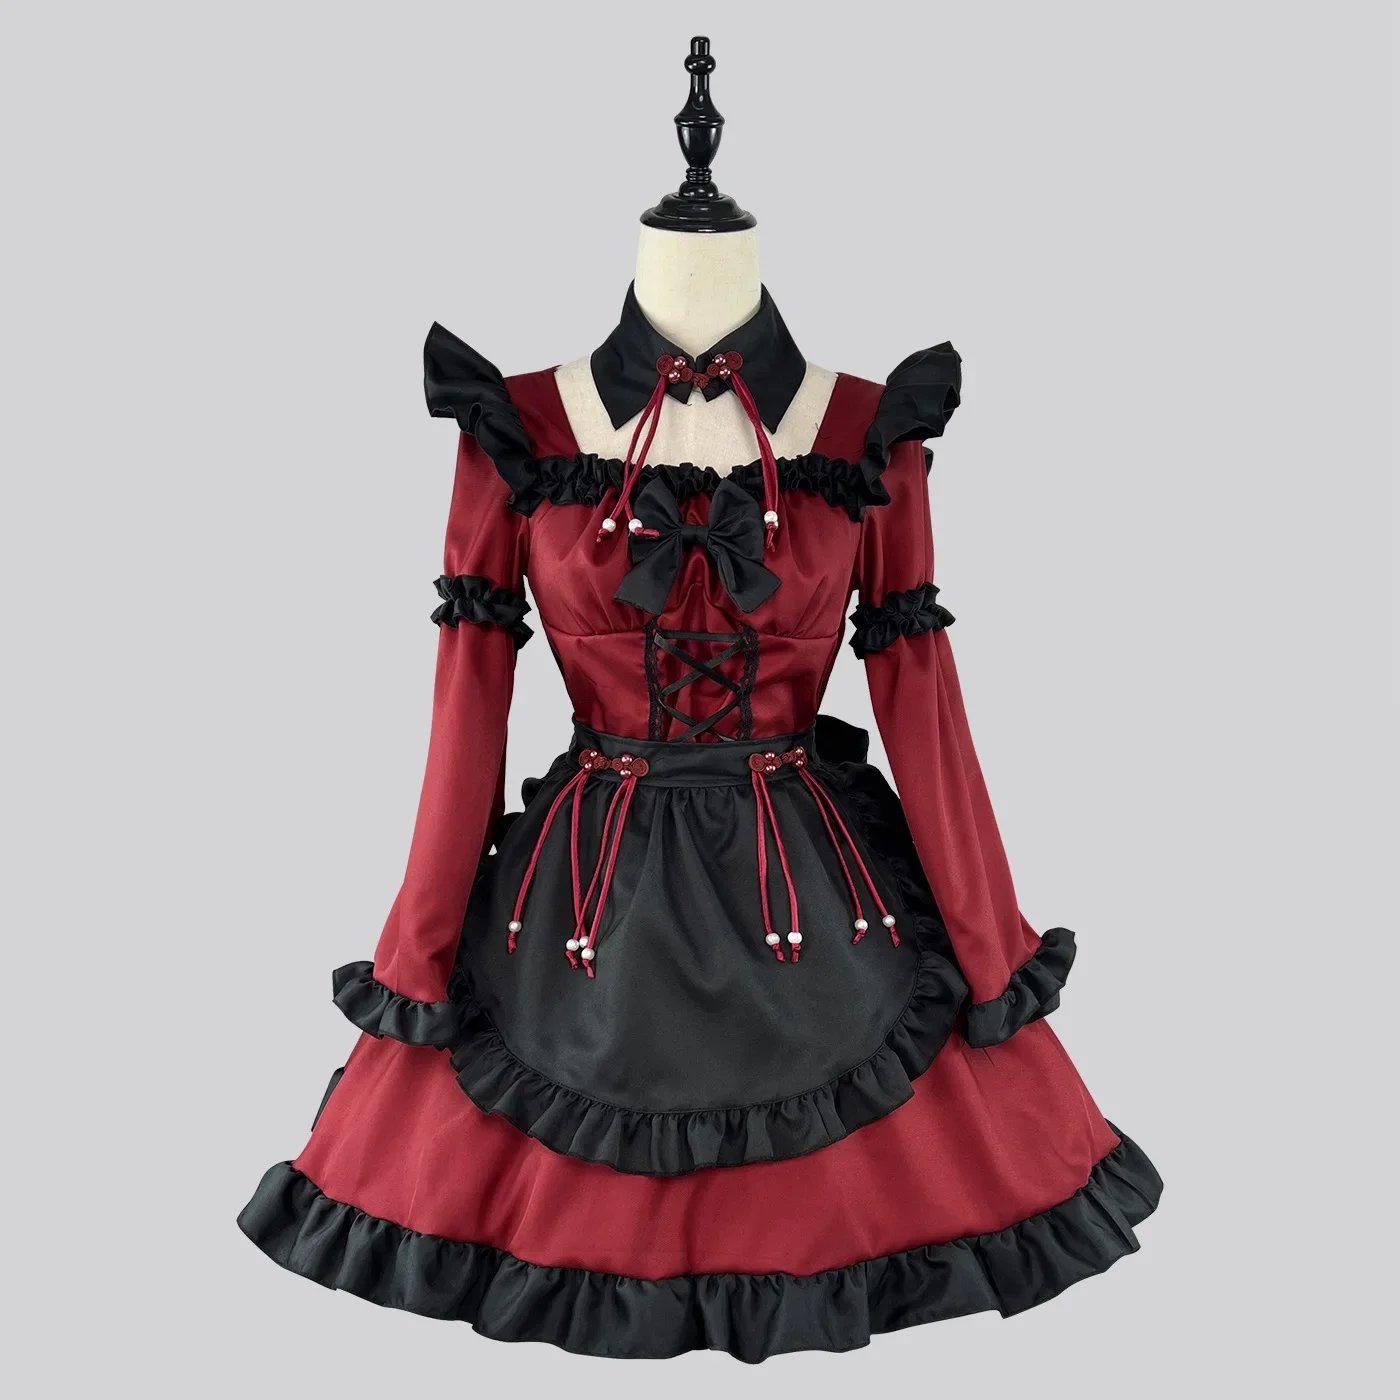 

Little Devil Lolita maid costume, anime, gothic role-playing costume, red girl maid costume, trendy girl maid party costume